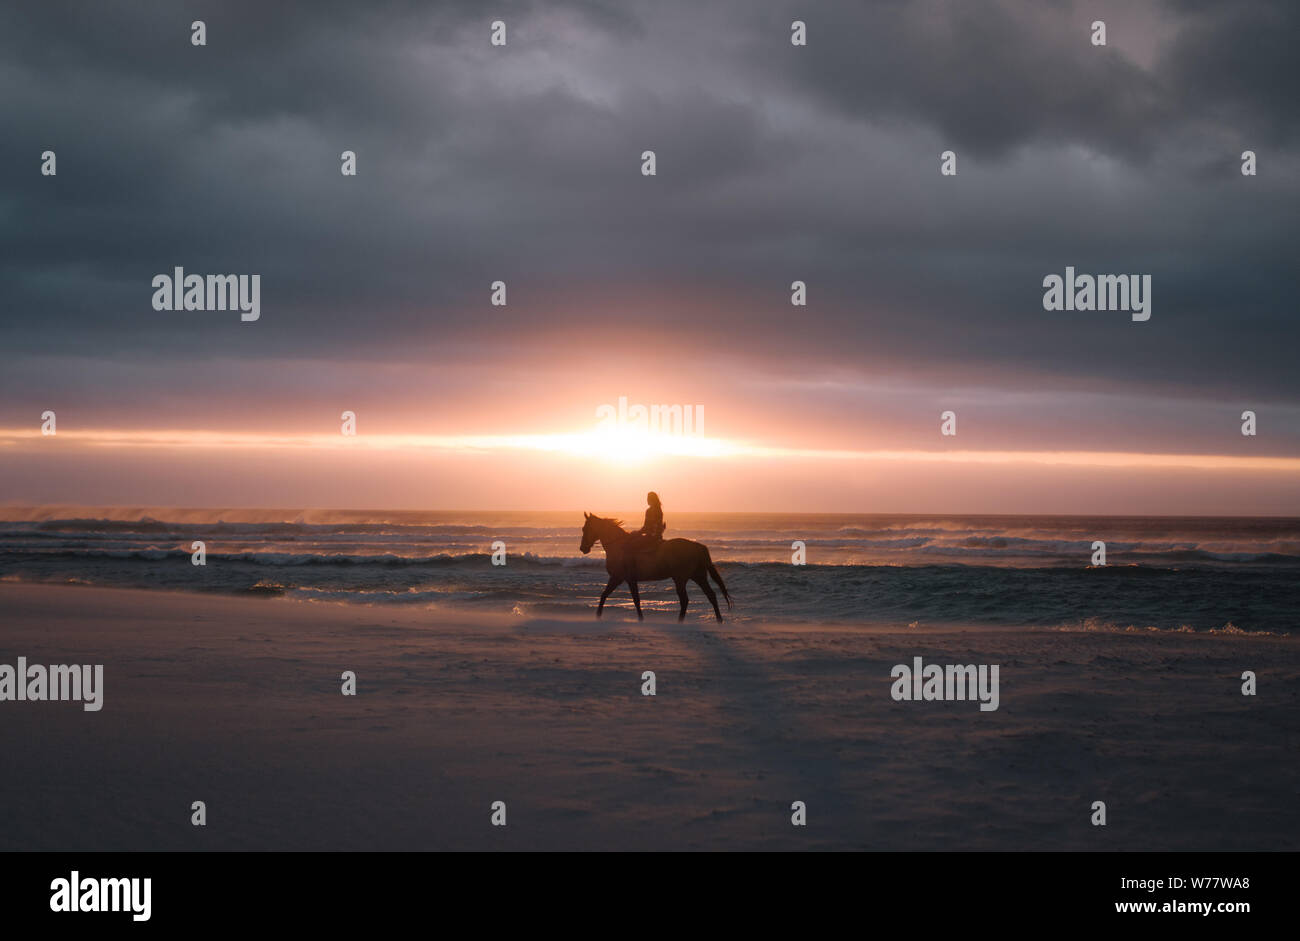 Silhouette of a rider on a horse at sunset on the beach. Woman horse riding on the sea shore at sunset. Stock Photo